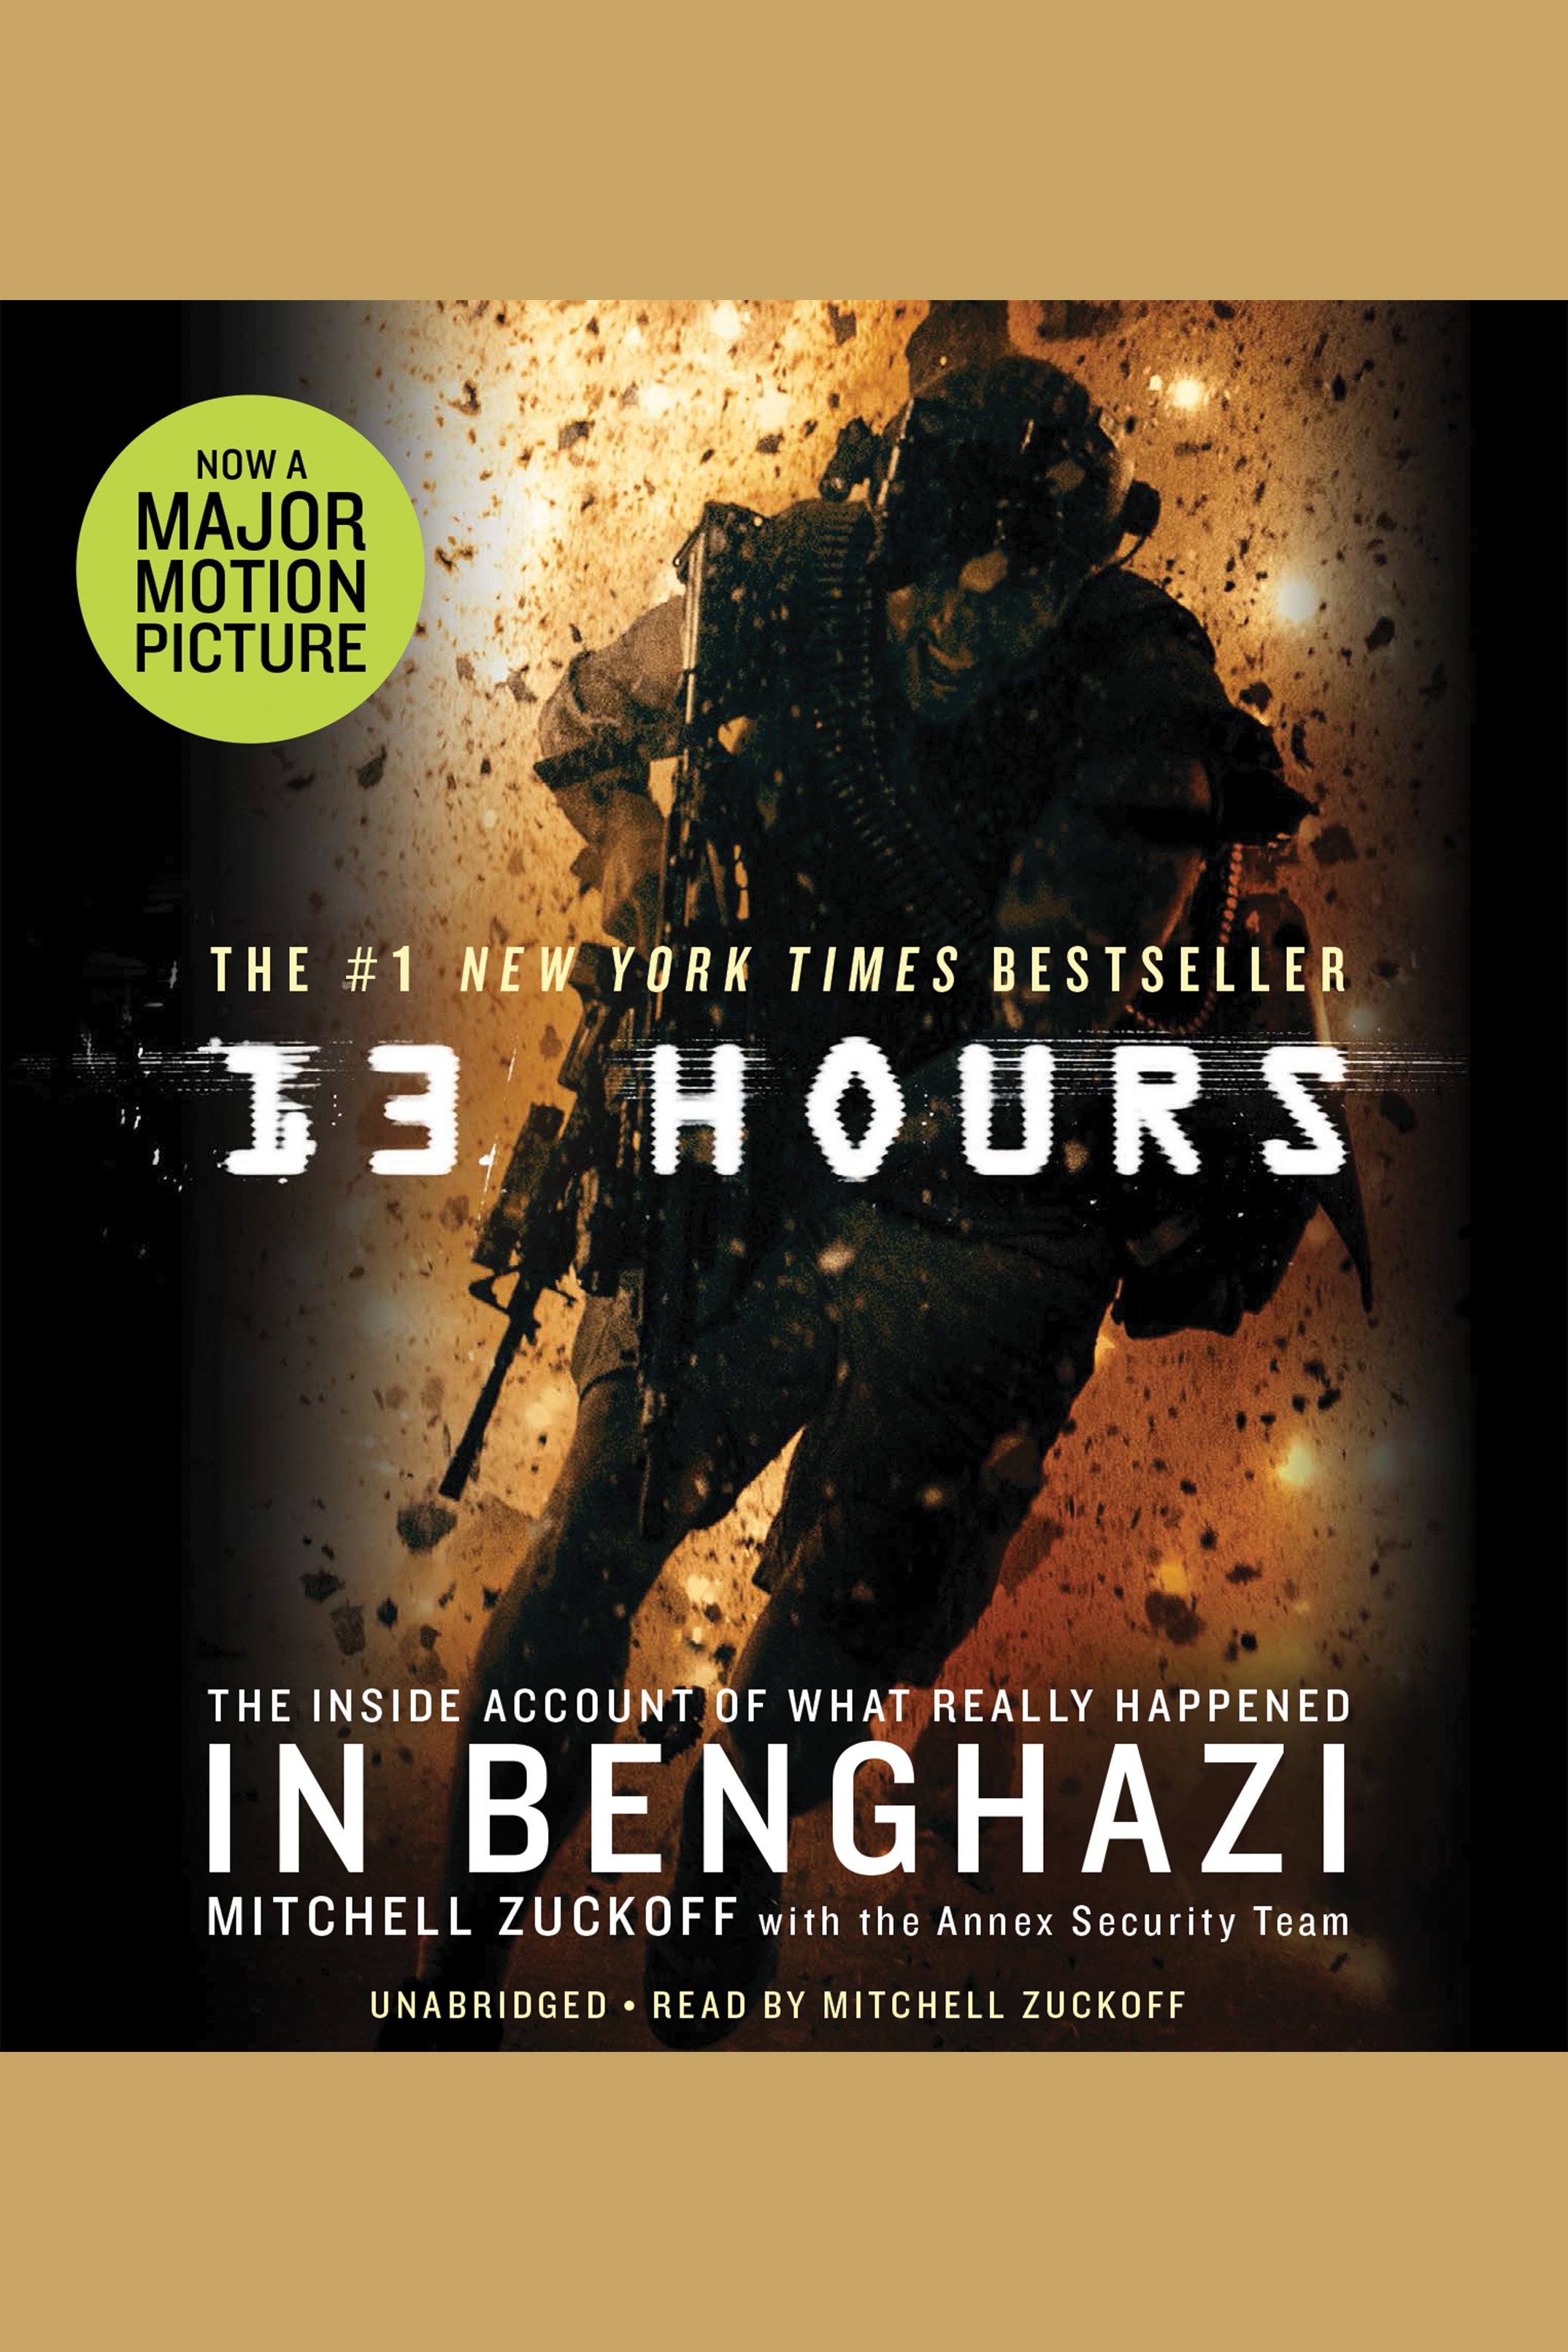 13 hours a firsthand account of what really happened in Benghazi cover image